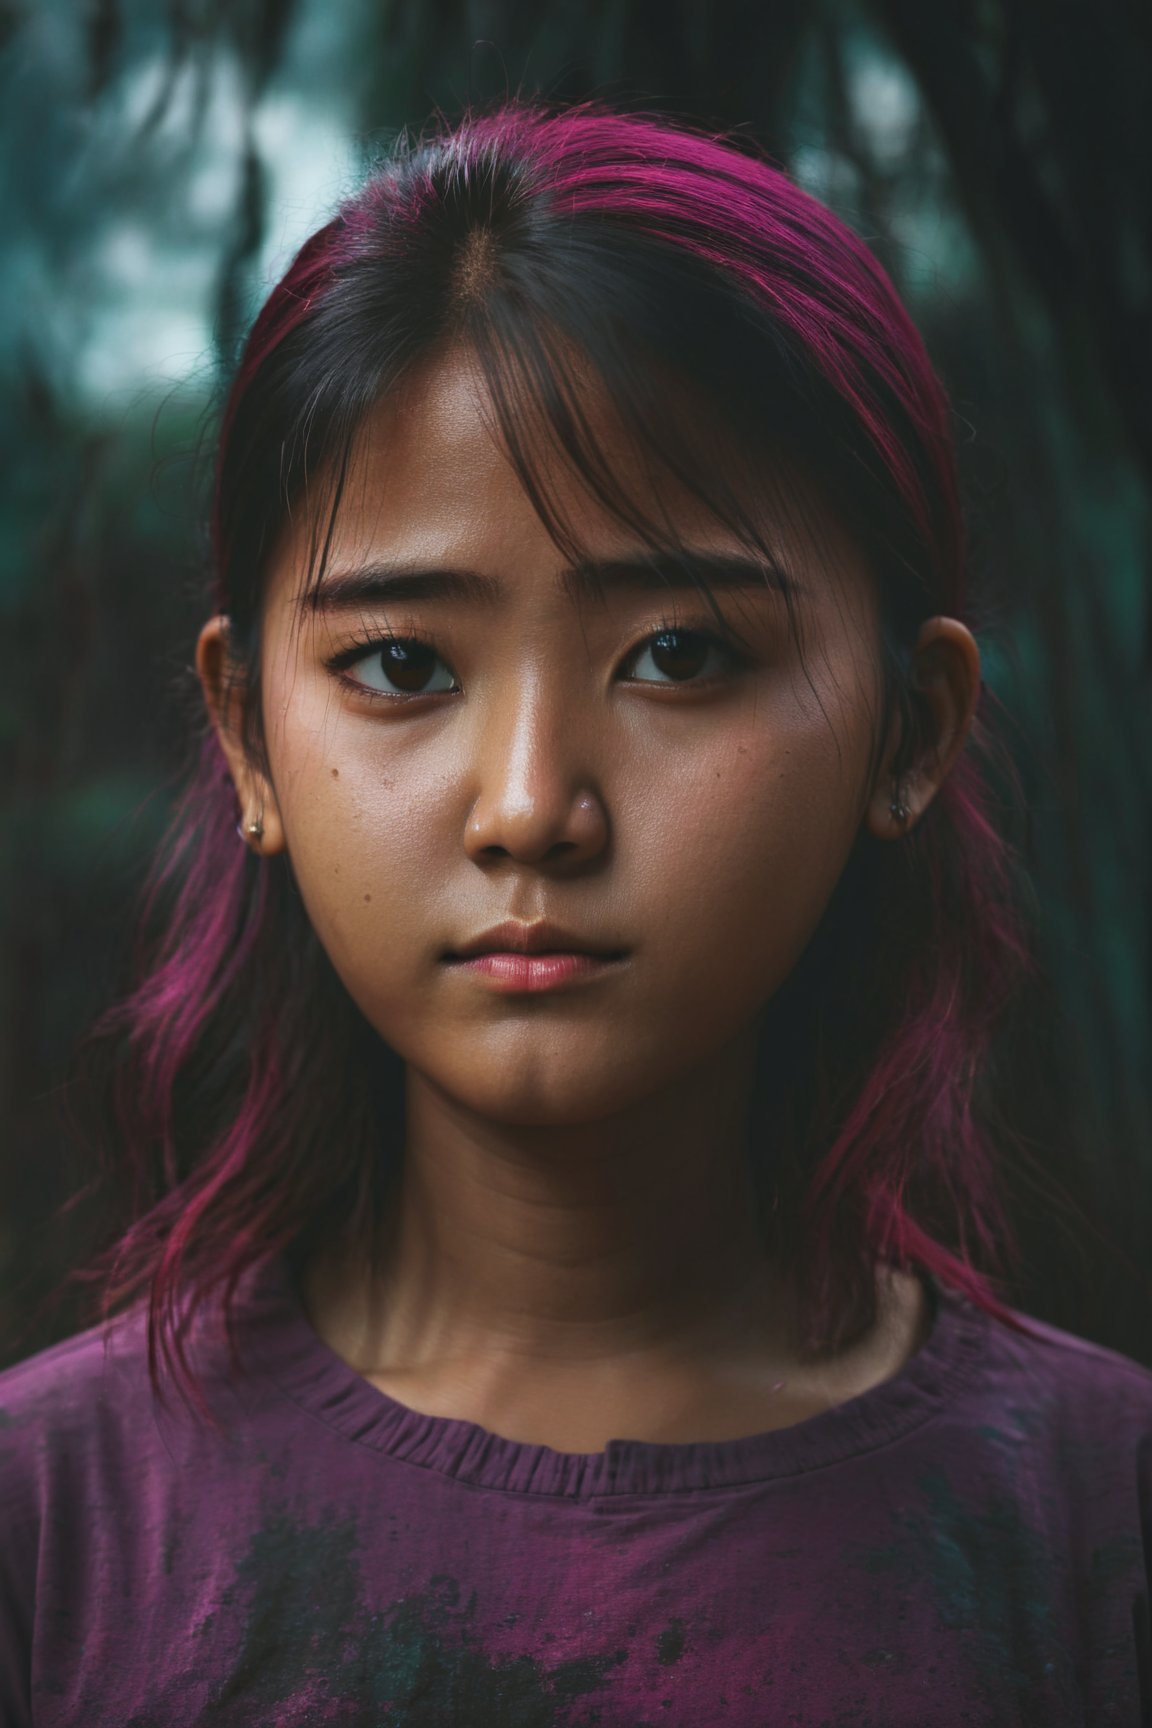 dark moody atmosphere,dark and moody,Generate a high-resolution, detailed, and colorful image that captures an 18-year-old cambodian Girl with a Micro Bangs hairstyle and magenta tinted hair. Her youthful energy and vibrant character should be particularly emphasized, making her the radiant centerpiece of the image. The background should depict a captivating landscape or scene that draws the viewer's attention to the girl. Optimize the lighting and composition to make the image particularly appealing and aesthetically pleasing. The image should be a masterful digital painting reminiscent of the quality and style of renowned artists.
